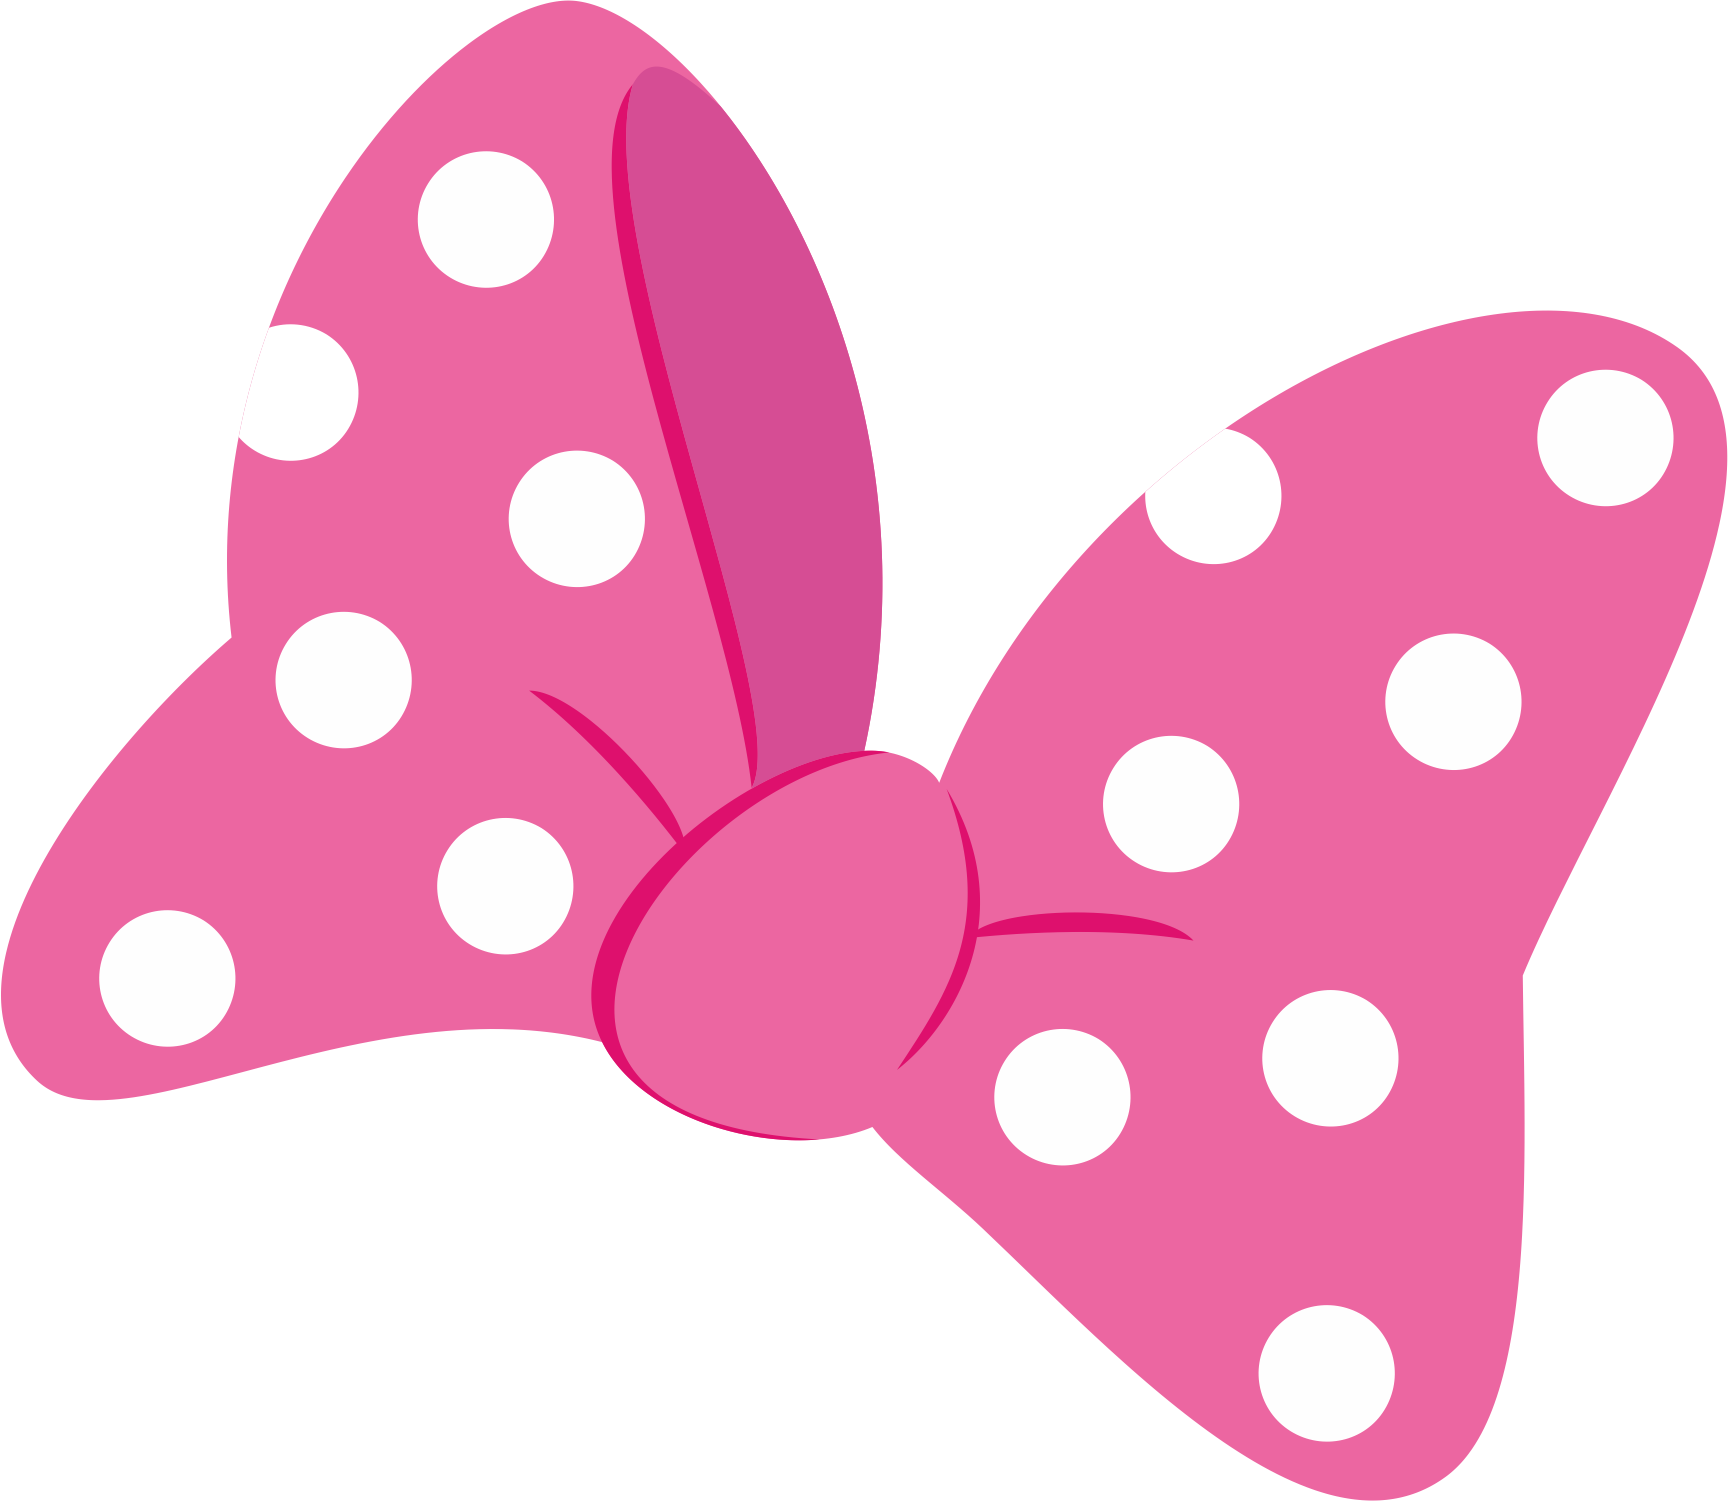 bows clipart pink